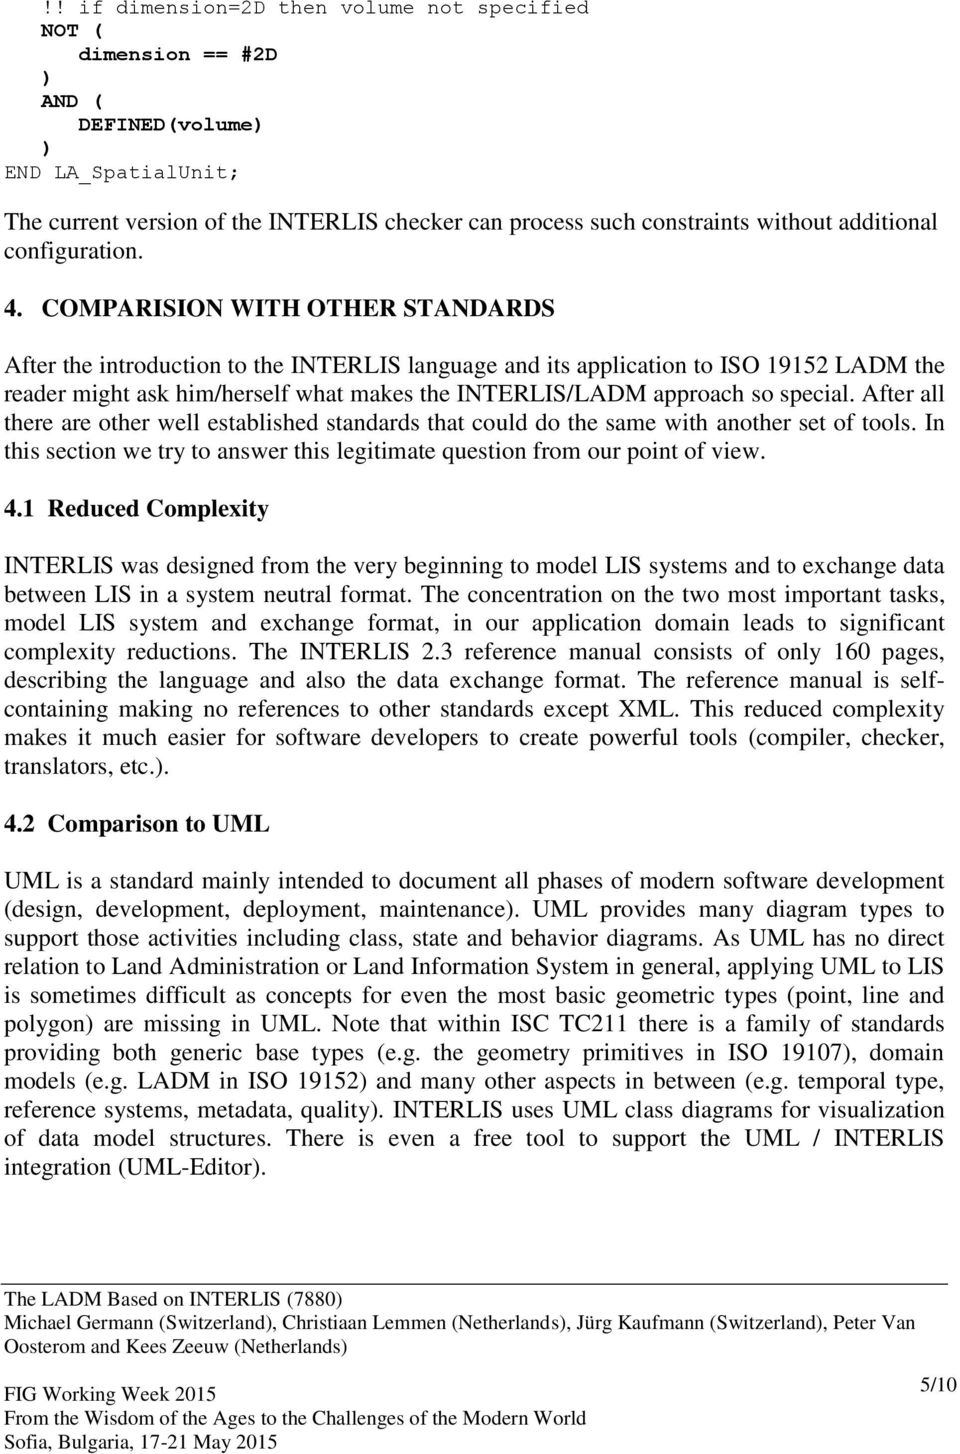 COMPARISION WITH OTHER STANDARDS After the introduction to the INTERLIS language and its application to ISO 19152 LADM the reader might ask him/herself what makes the INTERLIS/LADM approach so